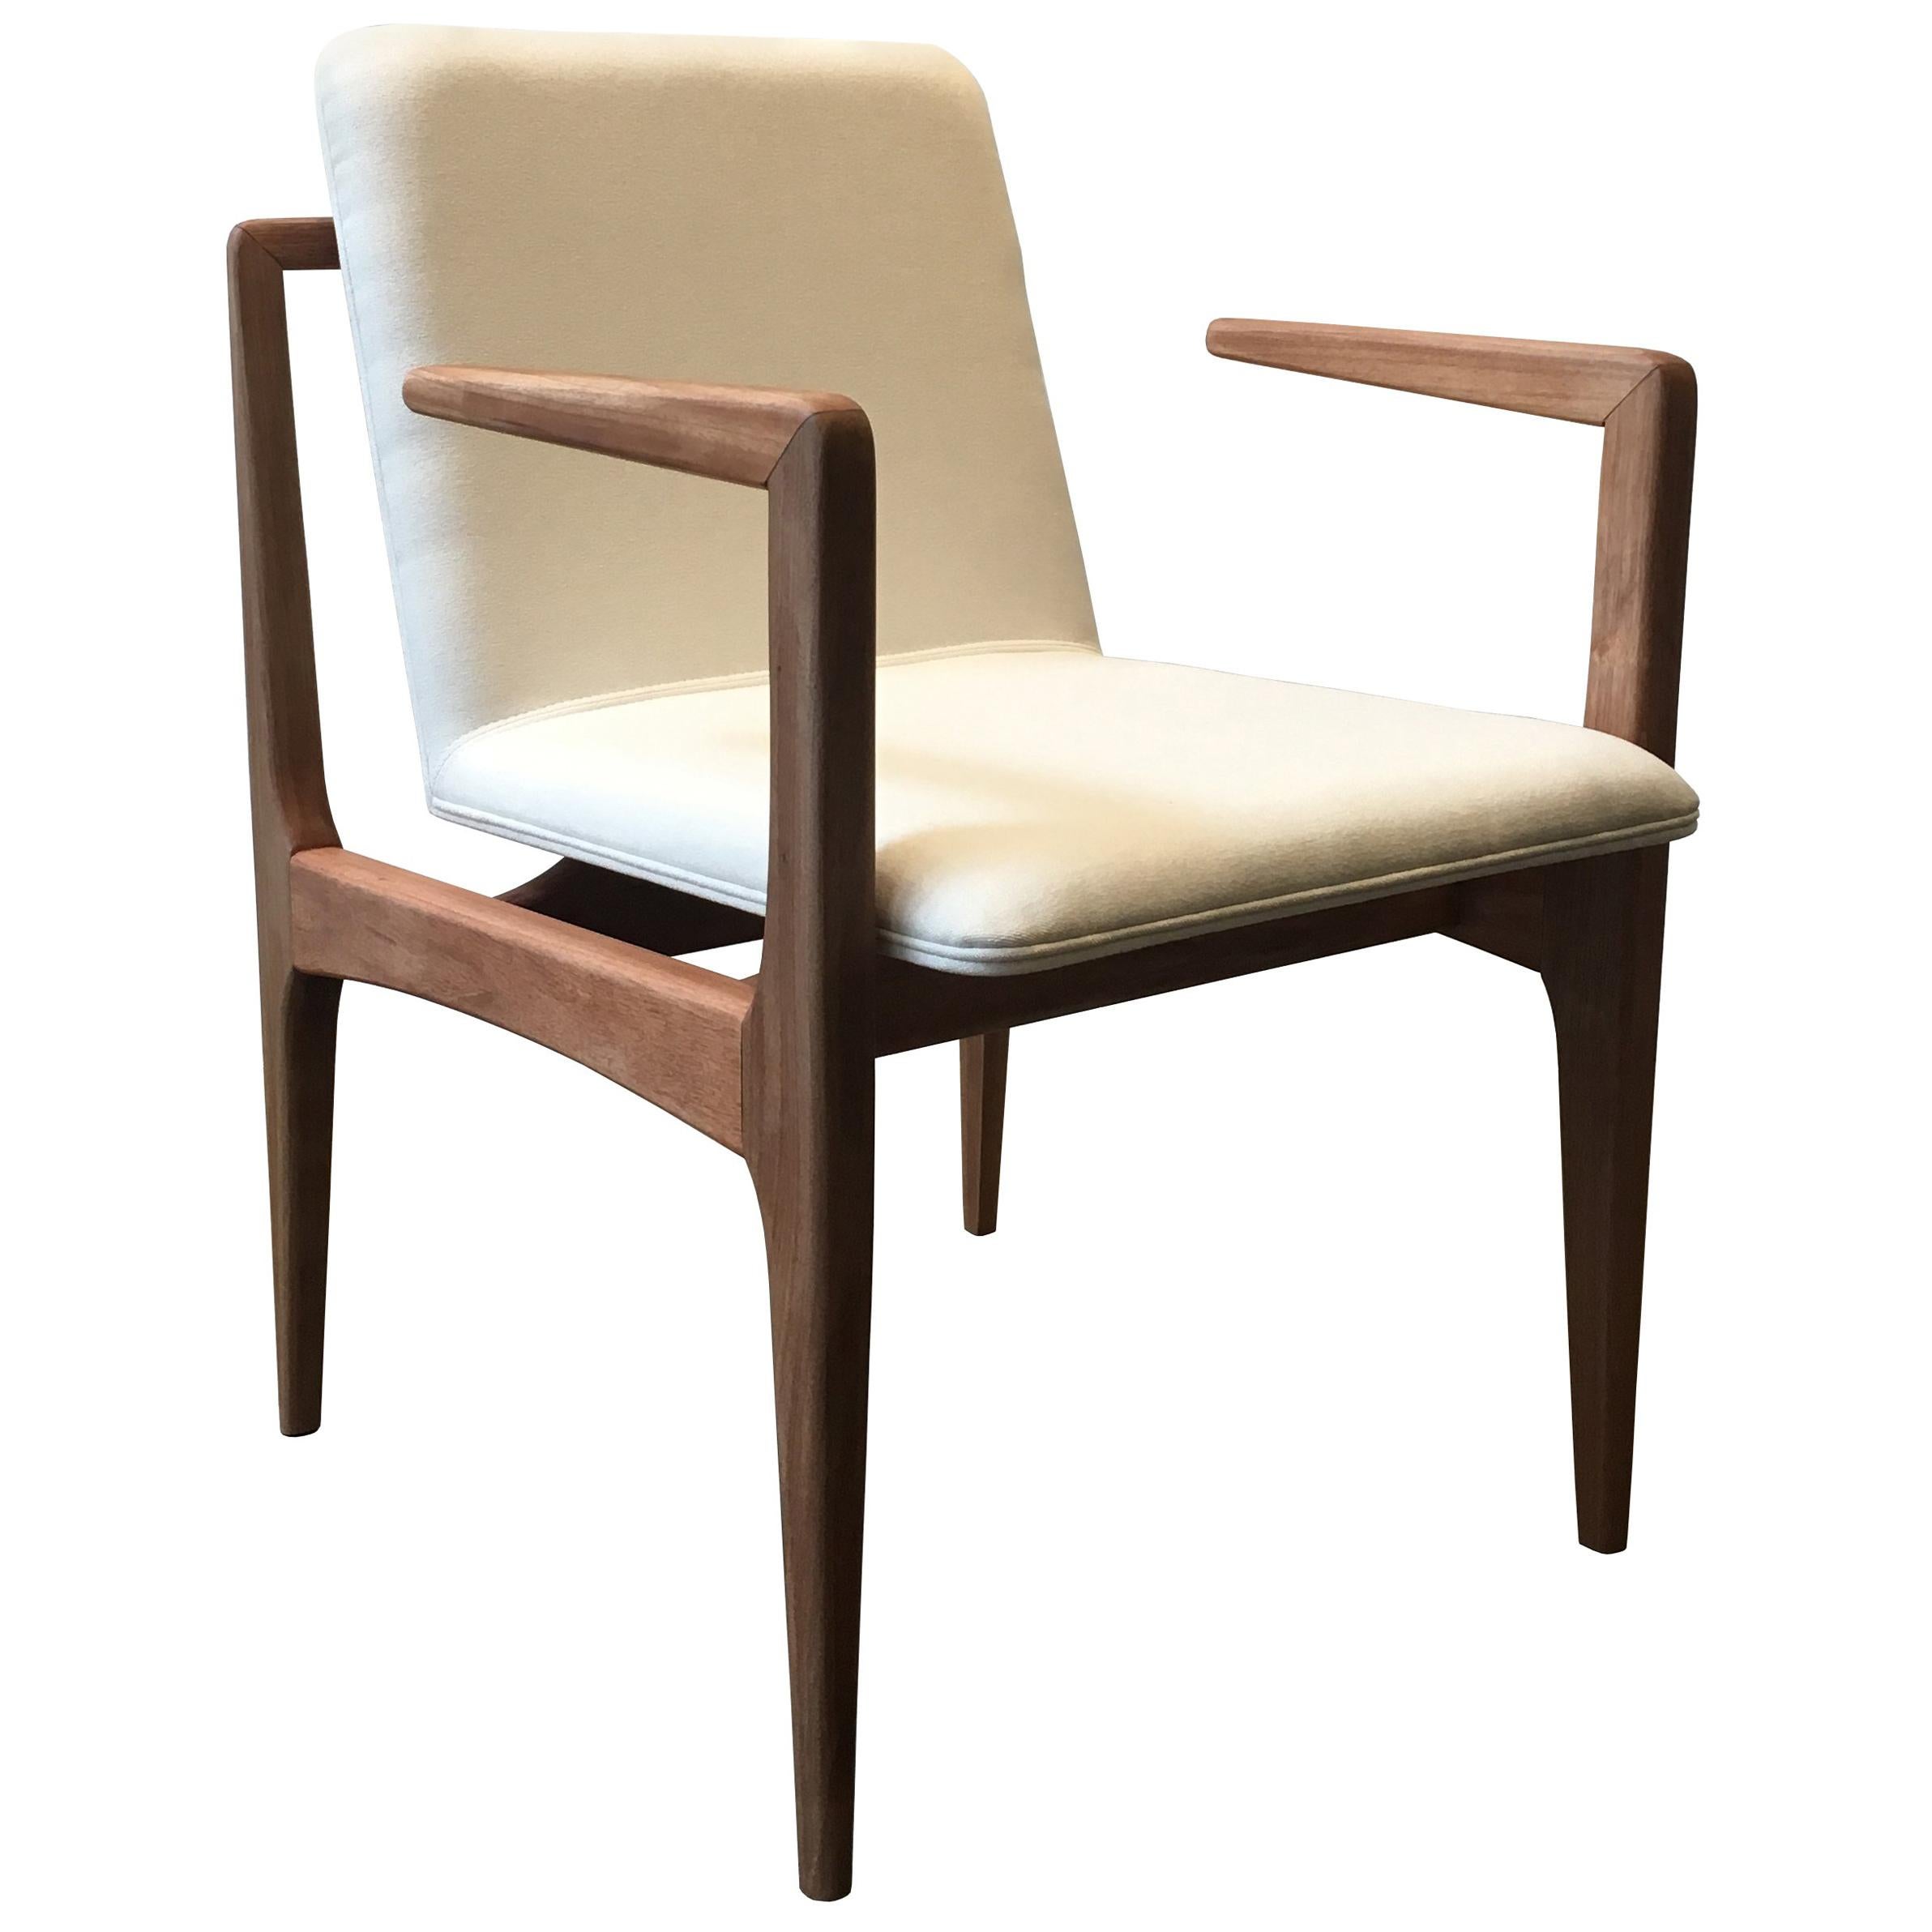 "Oscar" Minimalist Chair with Arms in Solid Jequitibá Wood and Handwoven